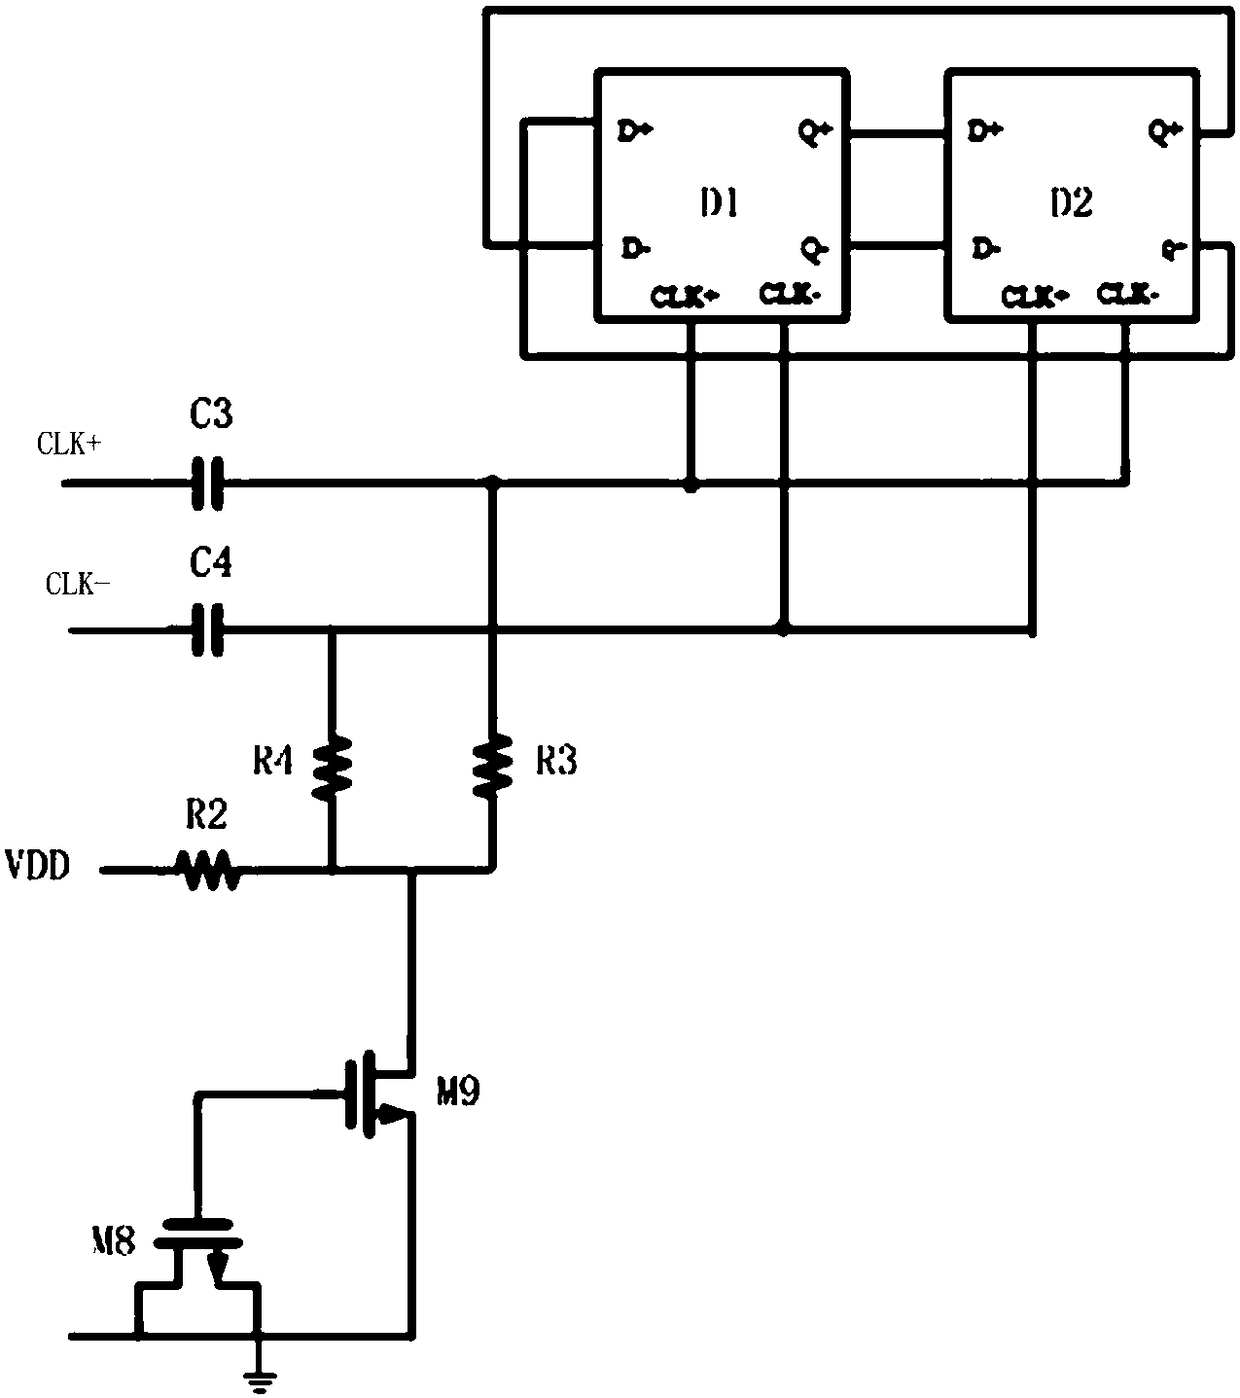 Voltage-controlled oscillator circuit and phase-locked loop